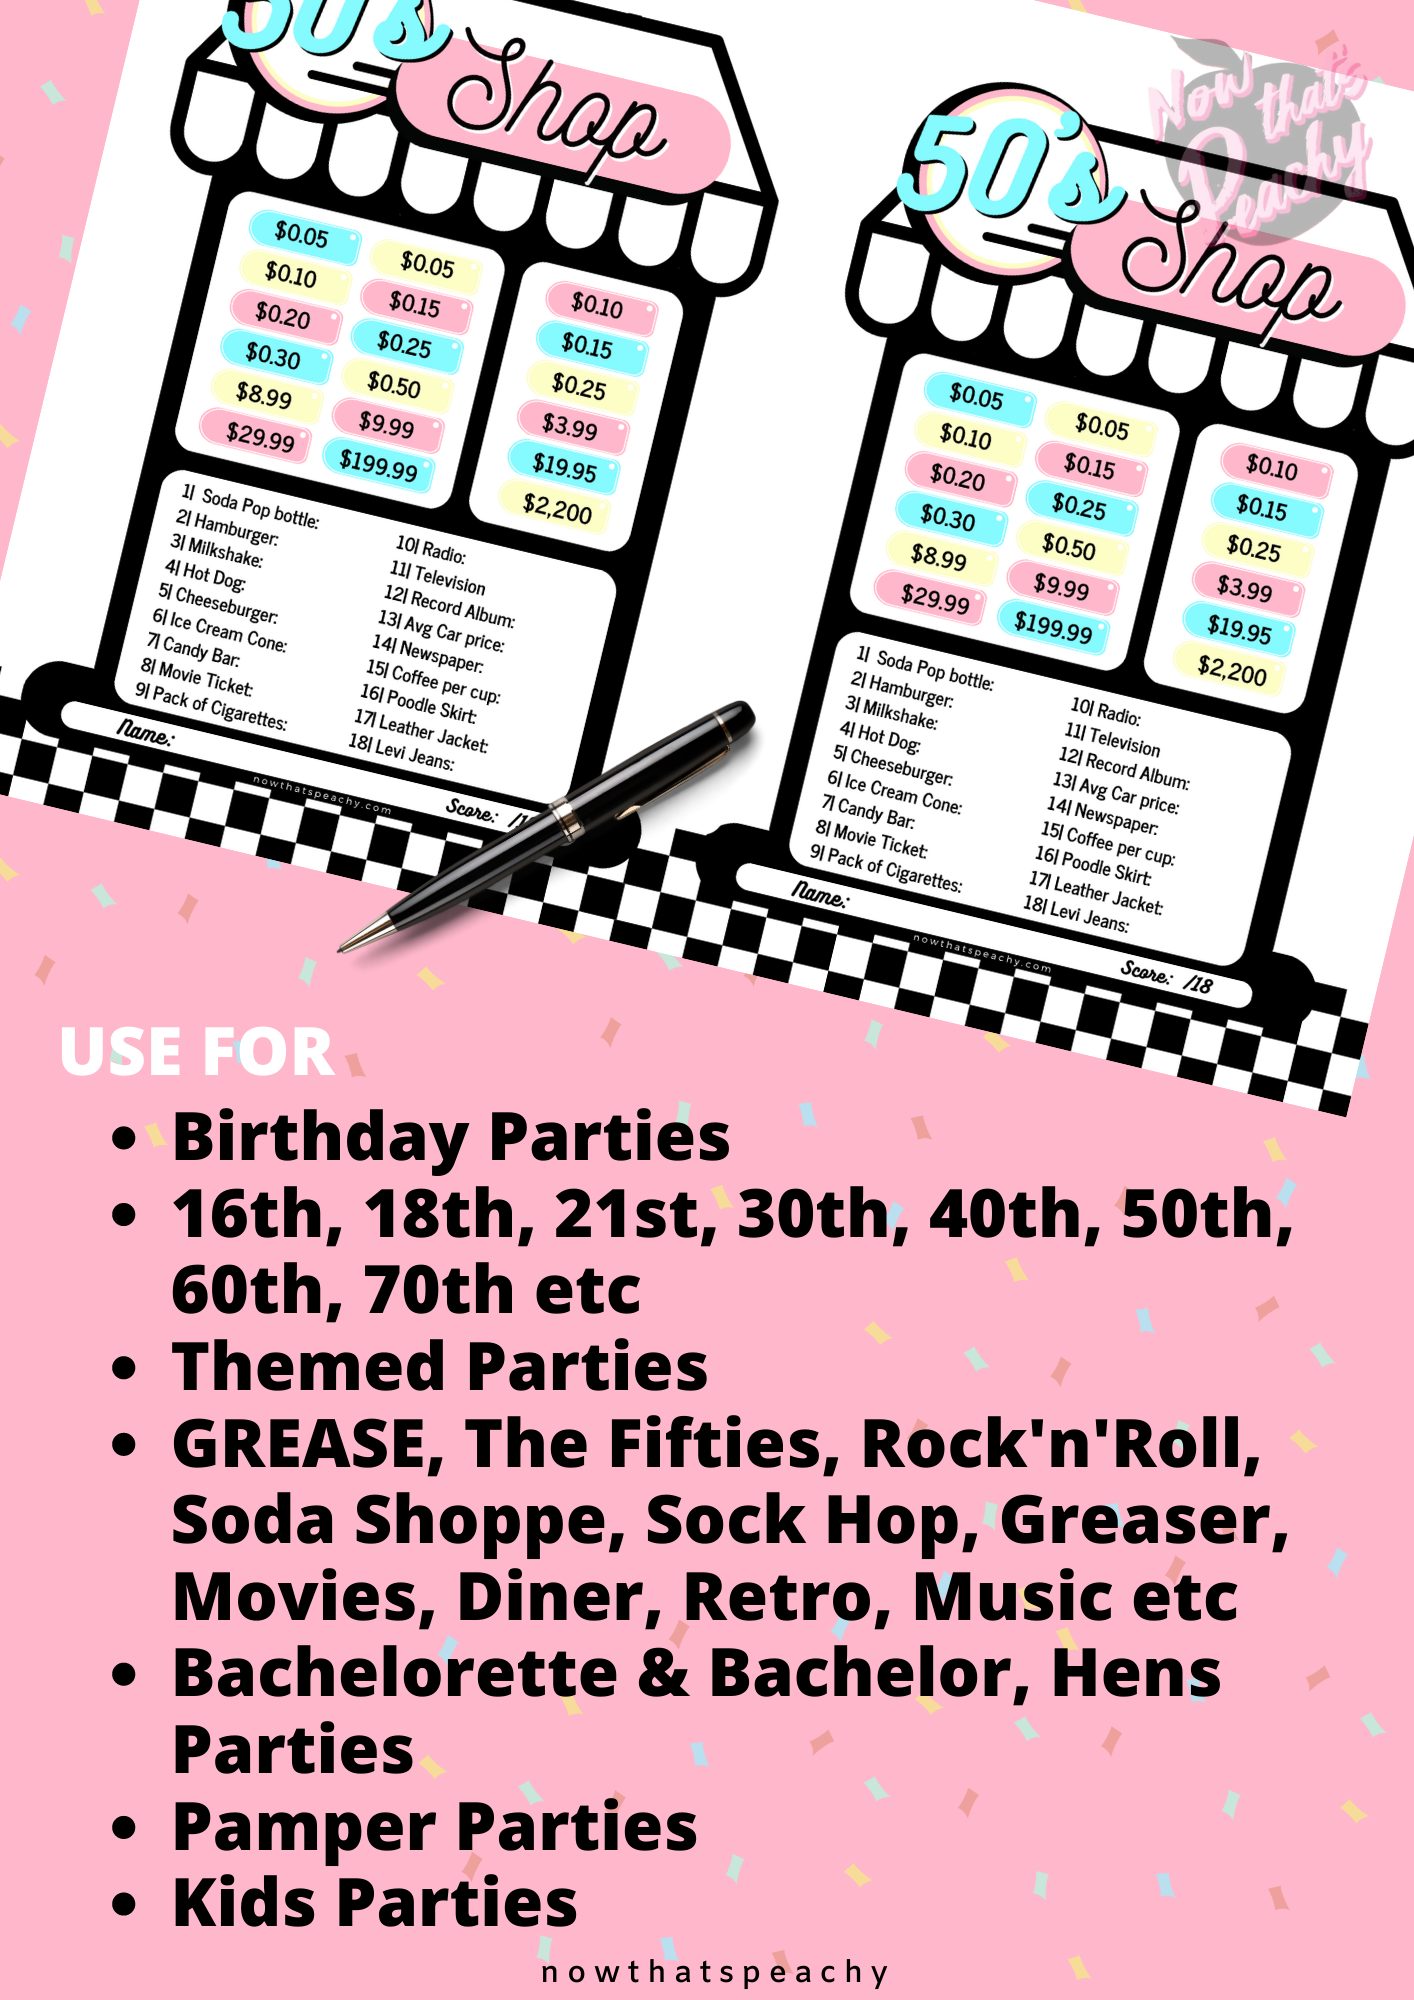 Diner Party 1950s classic american car drawing name matching card decorations guessing game printable instant downloas for fifties sock hop soda shoppe pop 1950s themed parties drawing fun easy cheap fast game